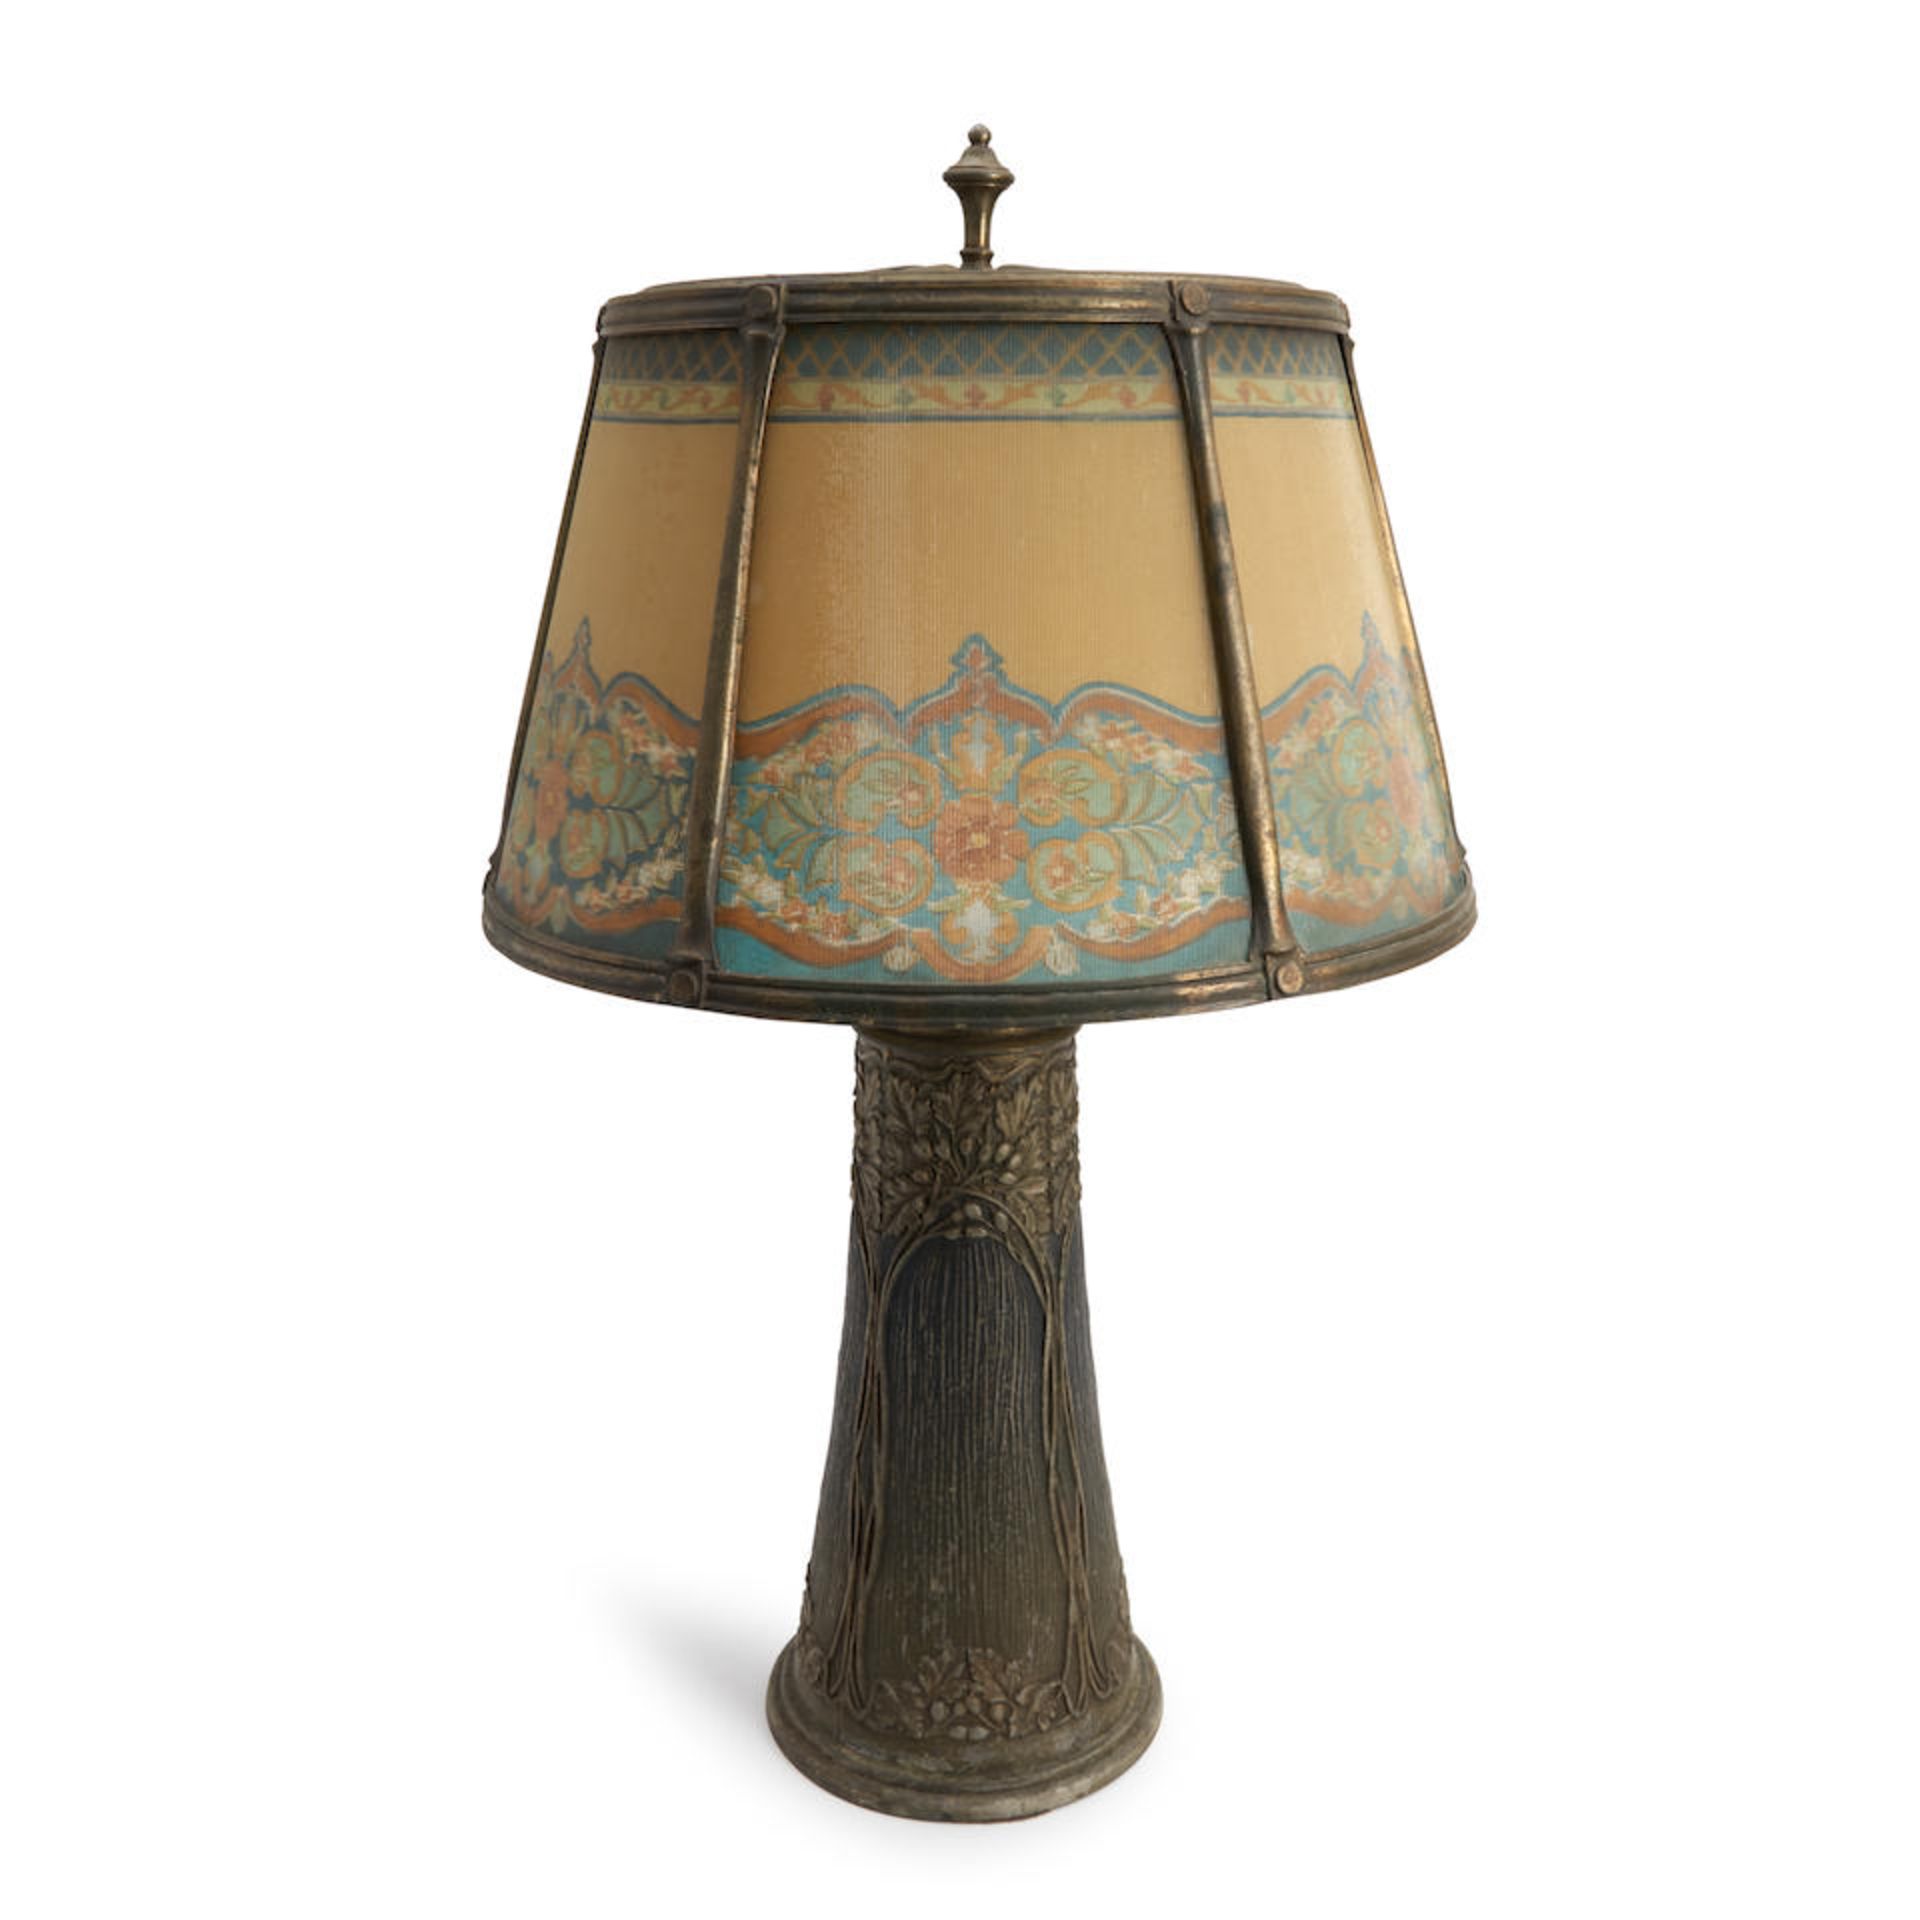 ART NOUVEAU REVERSE PAINTED TABLE LAMP, probably United States, c. 1910, patinated metal base, m...